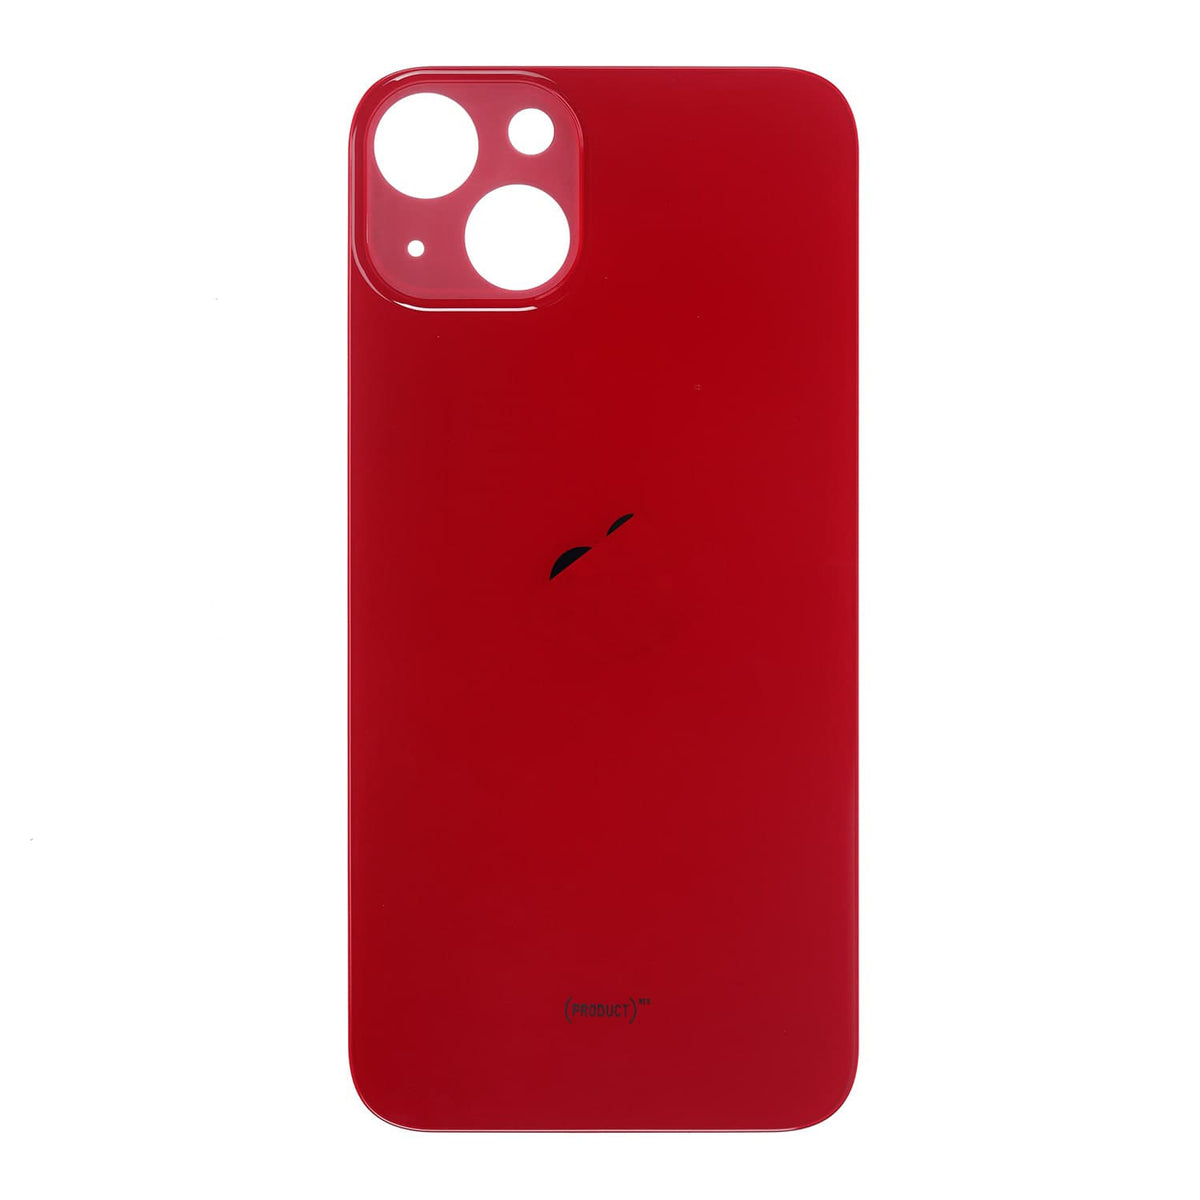 RED BACK COVER GLASS FOR IPHONE 13